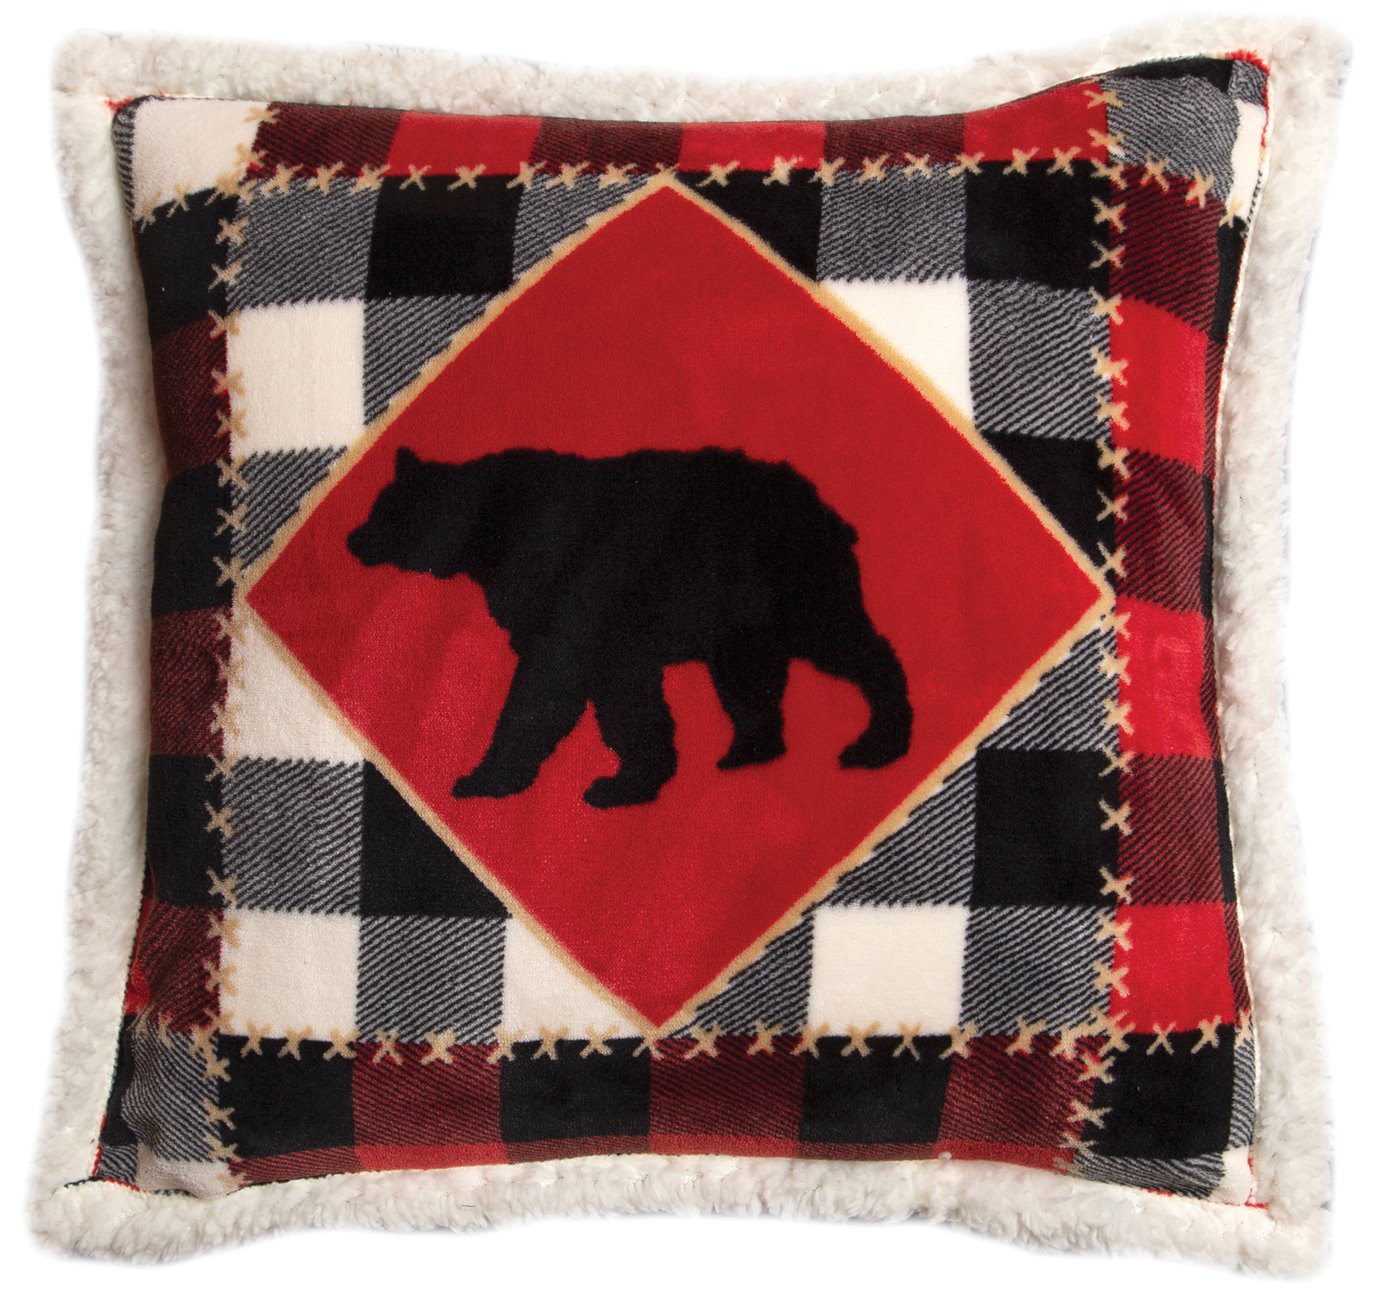 Lumberjack Bear Red Plaid Sherpa Throw Pillow (Insert Included) 18" x 18"